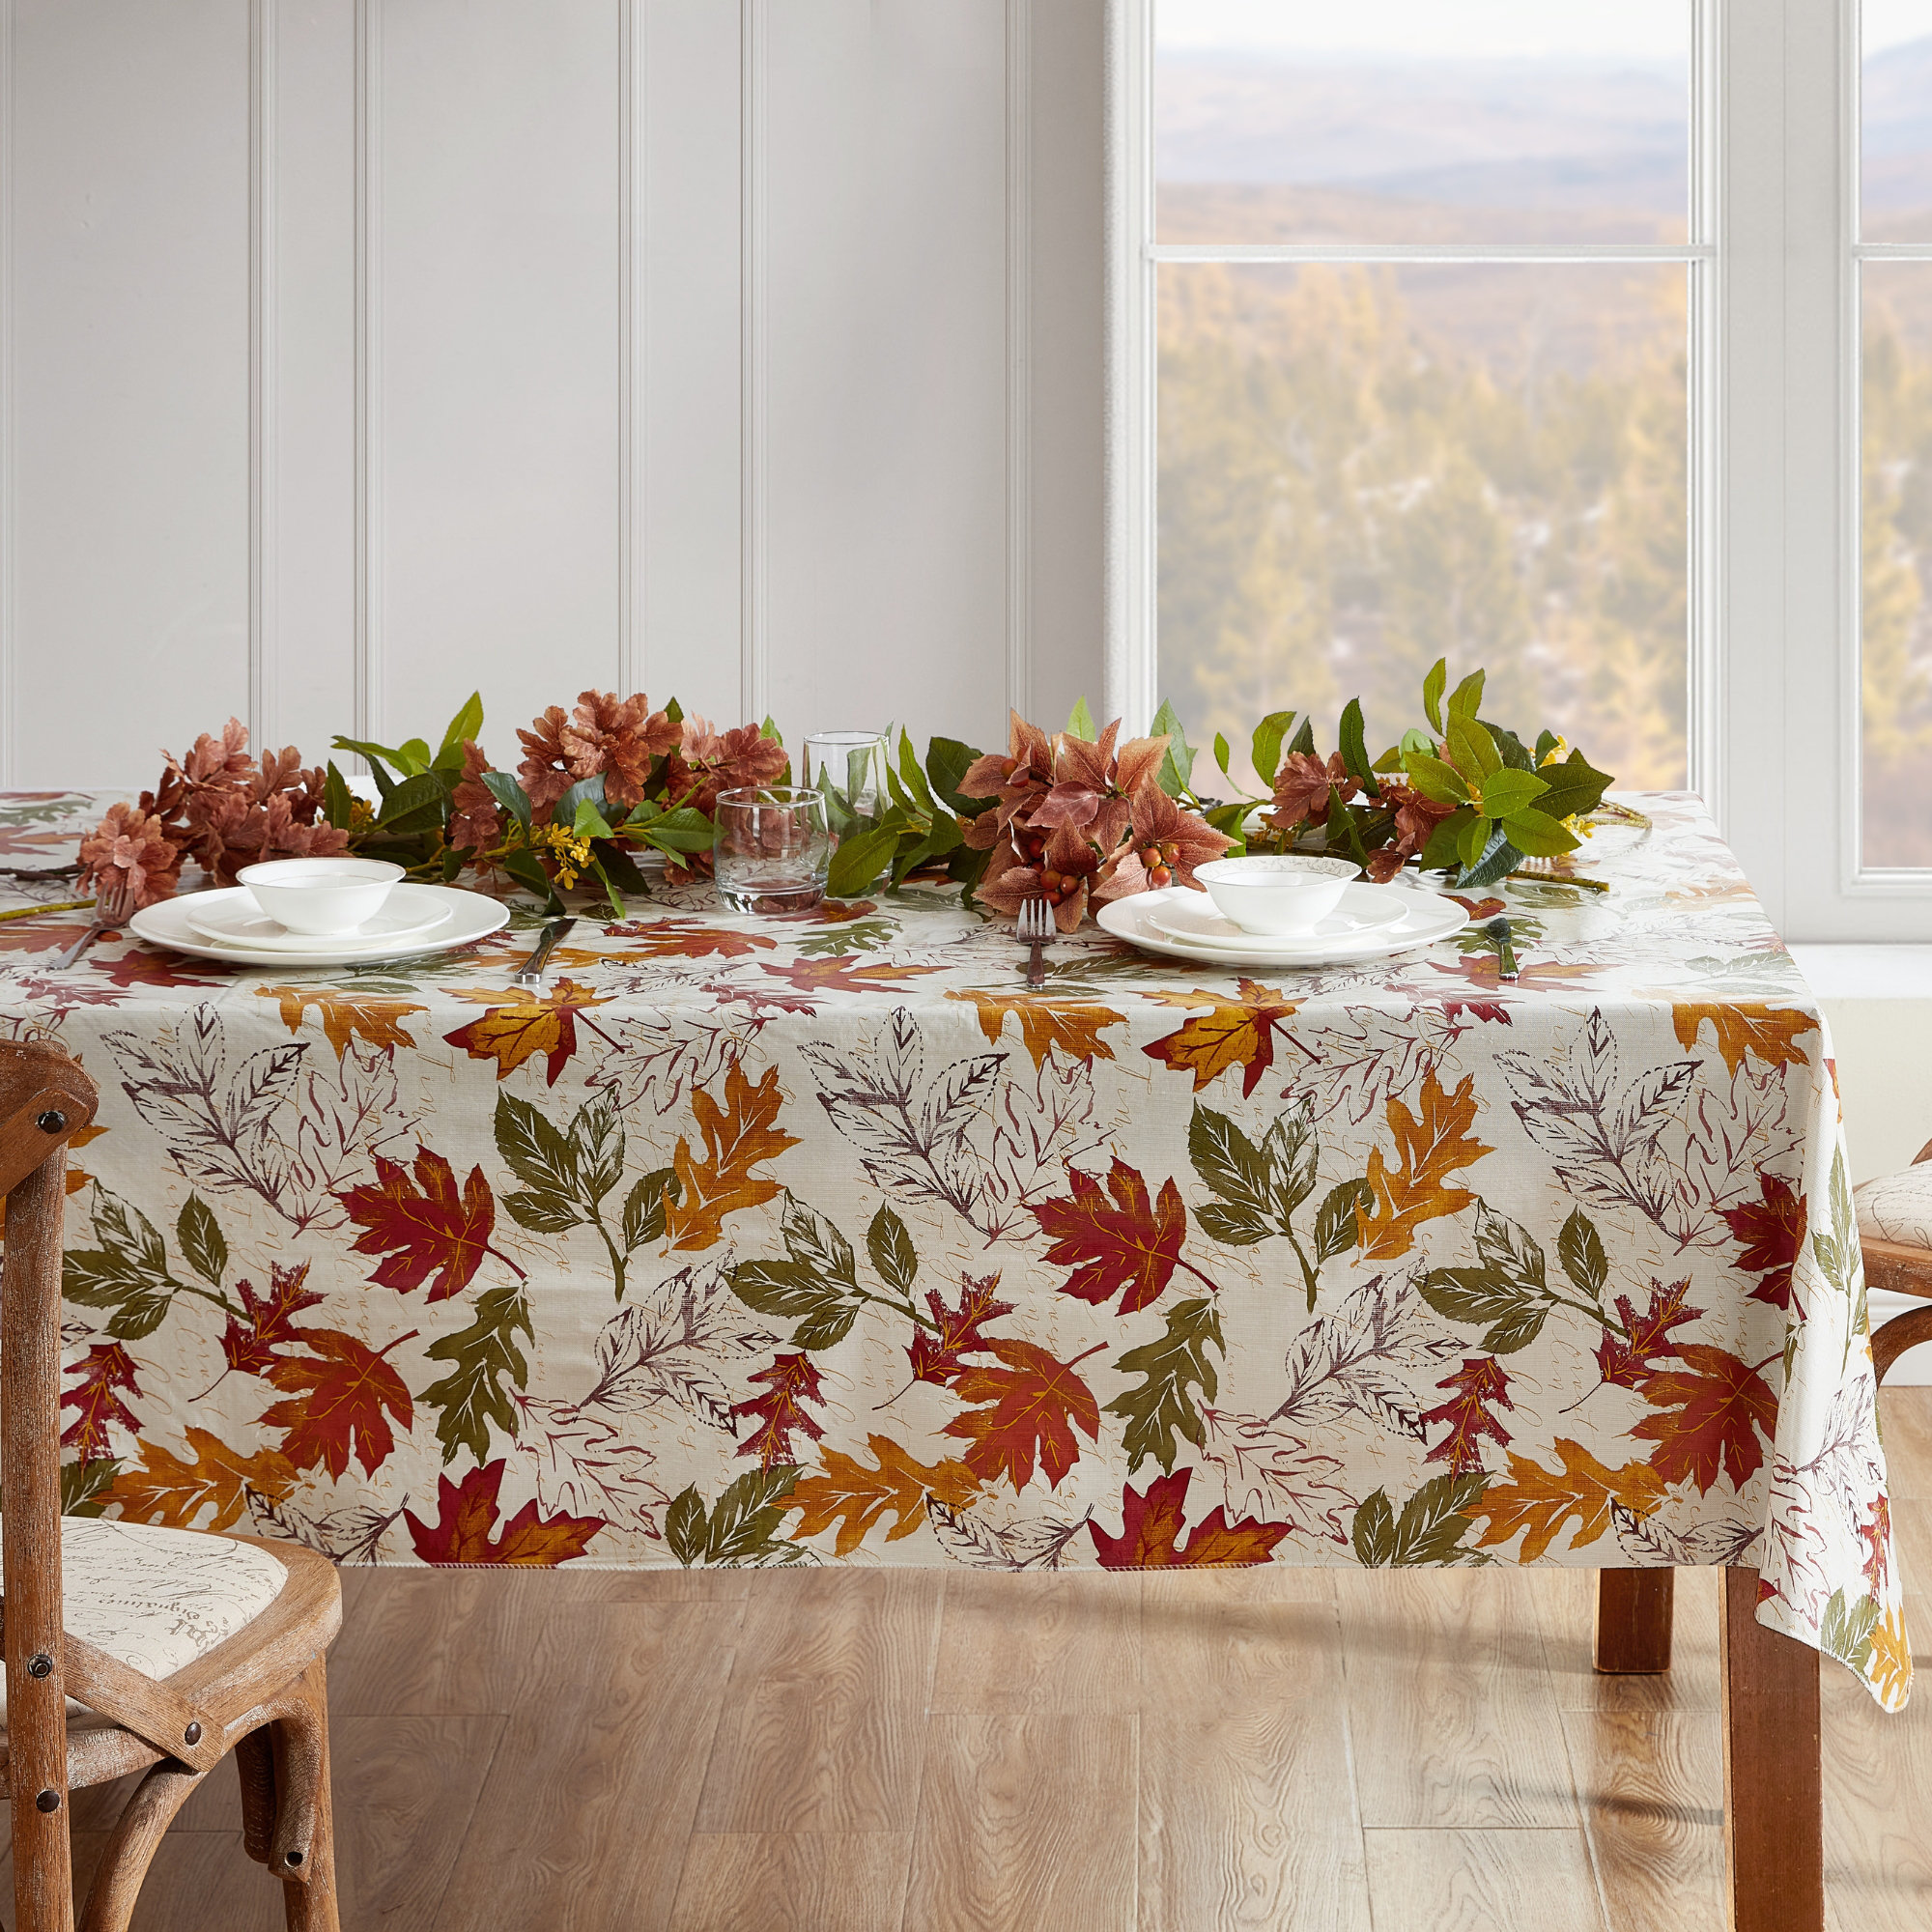 It's Thanksgiving! Vintage Thanksgiving Items To Add A Vintage Look To Your  Holiday Festivities - The Vintage Inn